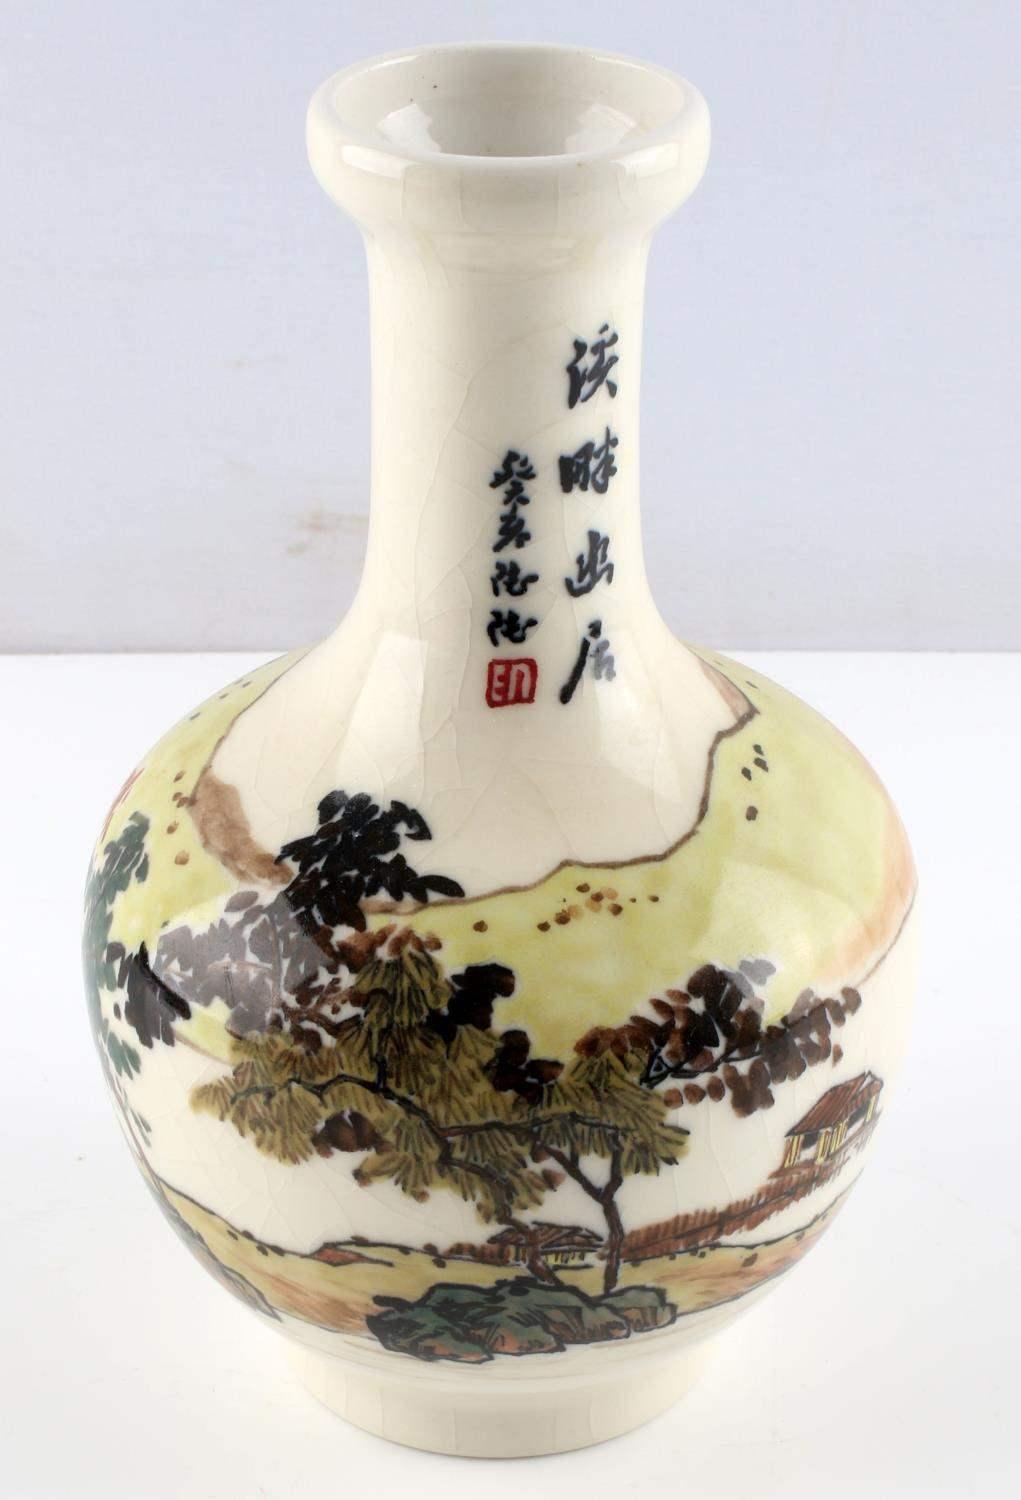 ANTIQUE CHINESE TRADITIONAL HAND PAINTED PORCELAIN